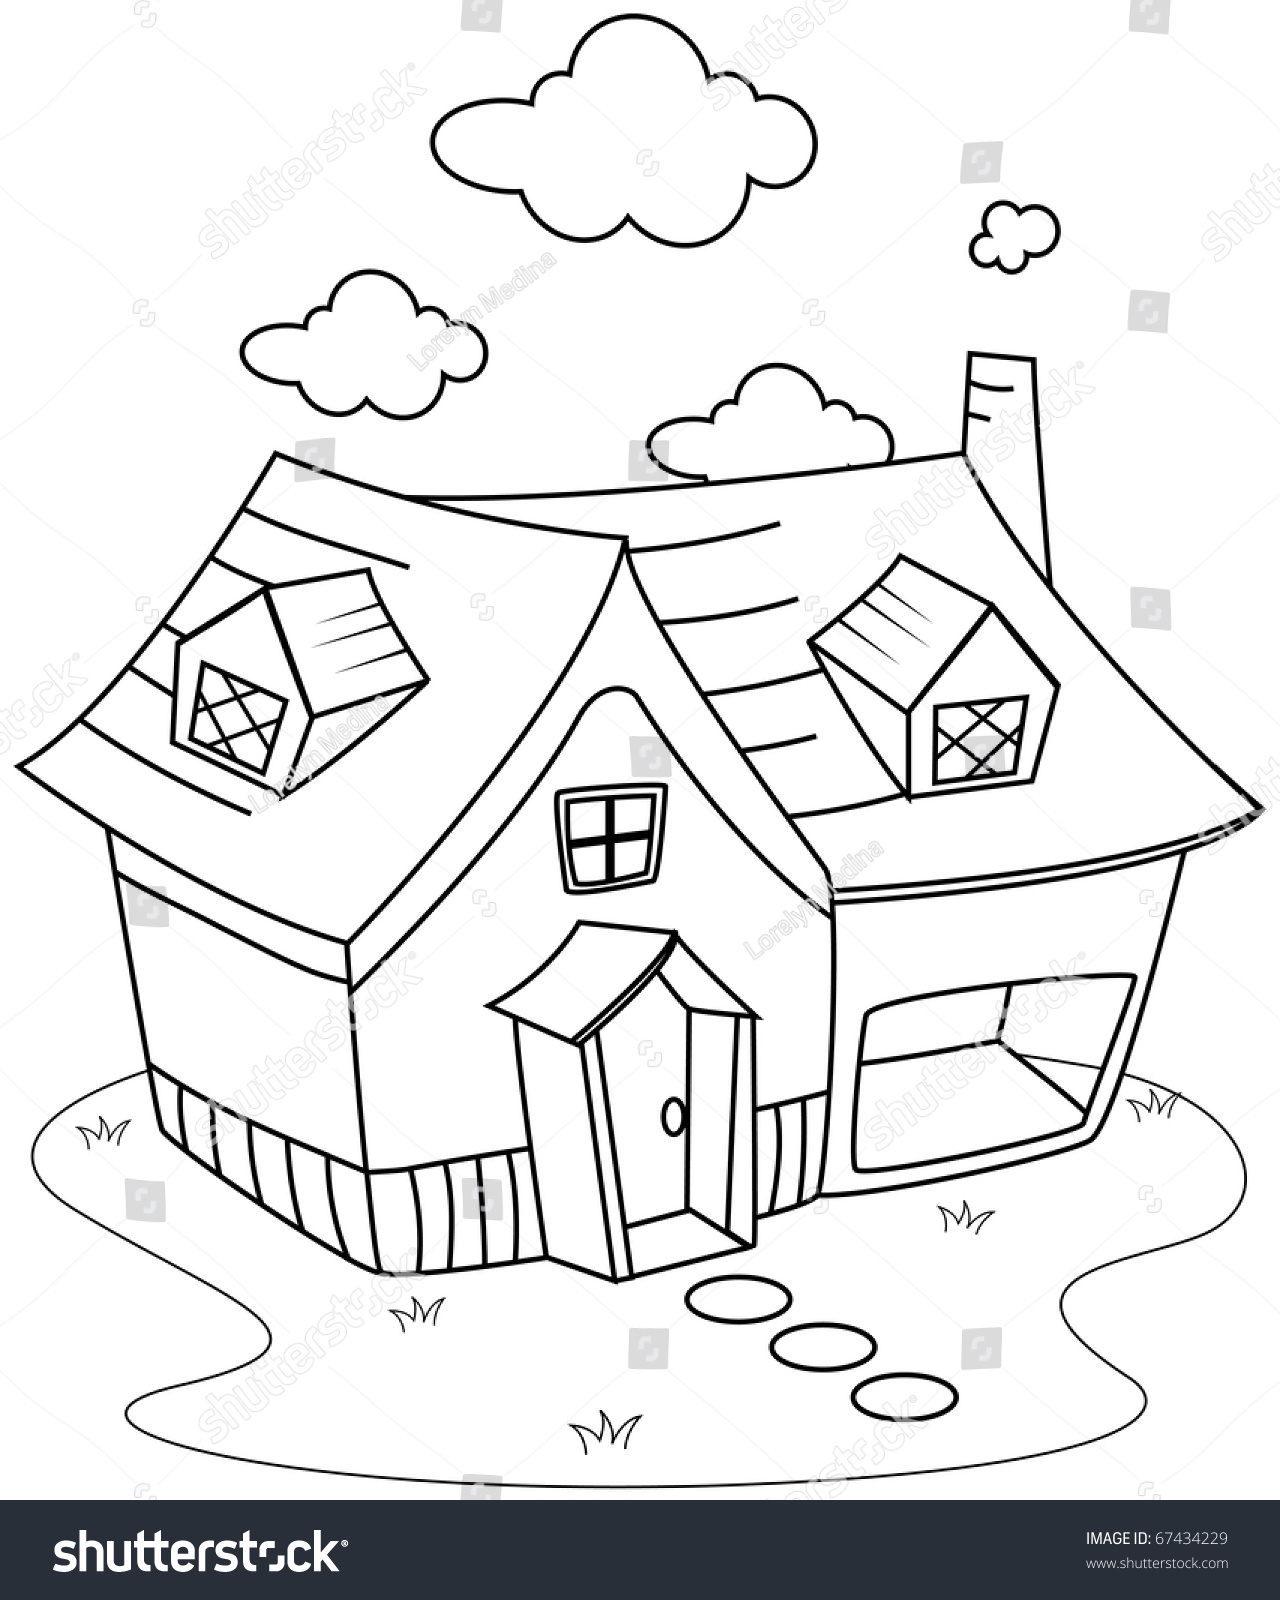 Line Art Illustration Of A Cute Little House (Coloring Page) - 67434229